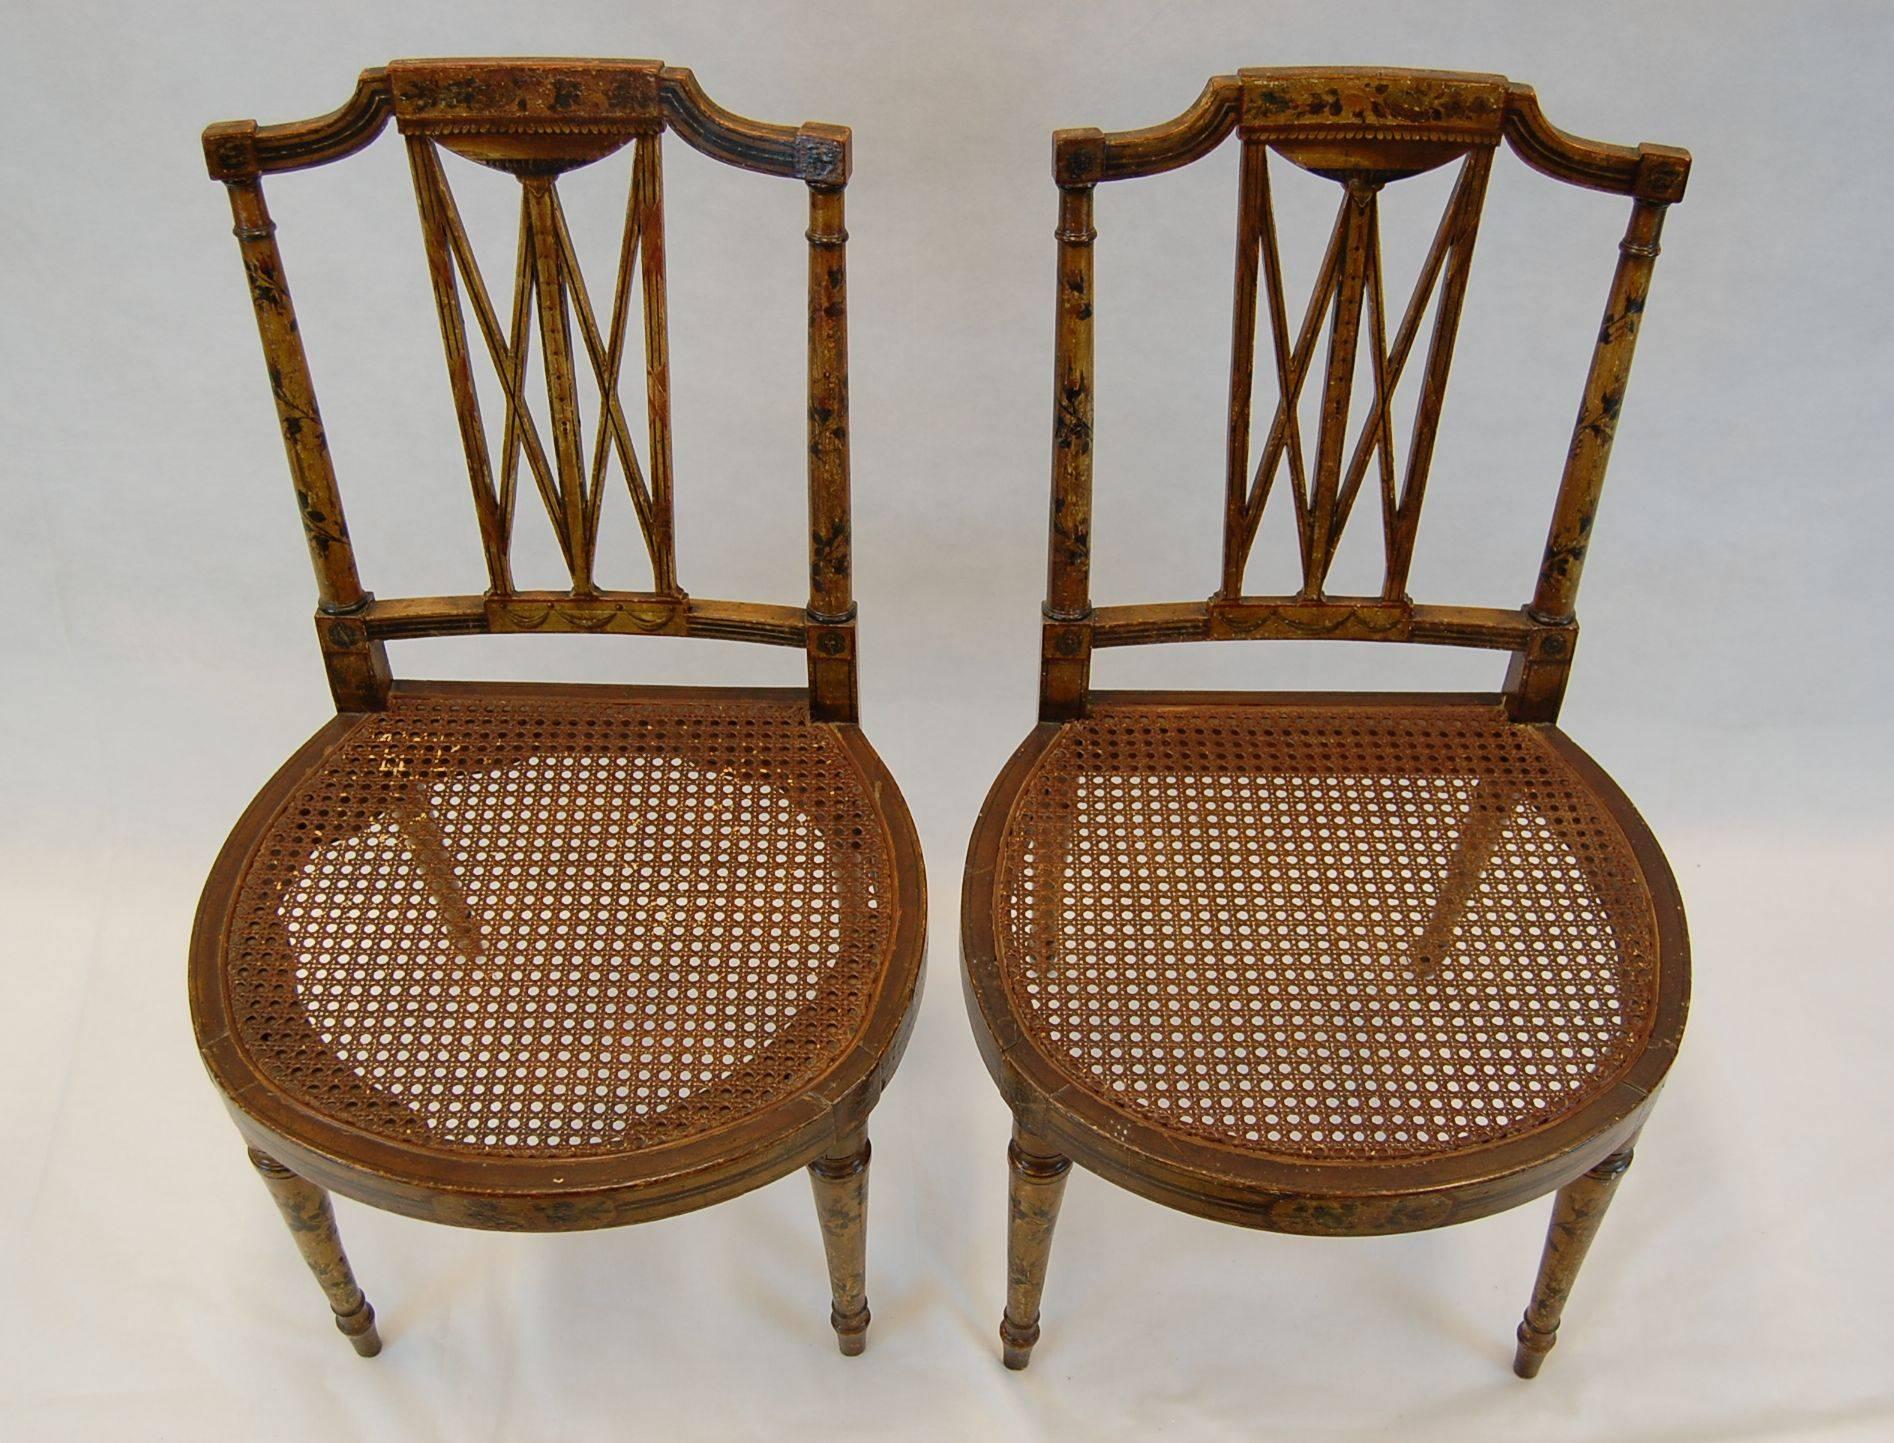 Pair of Early 19th Century English Chairs with Cane Seats, circa 1800 2